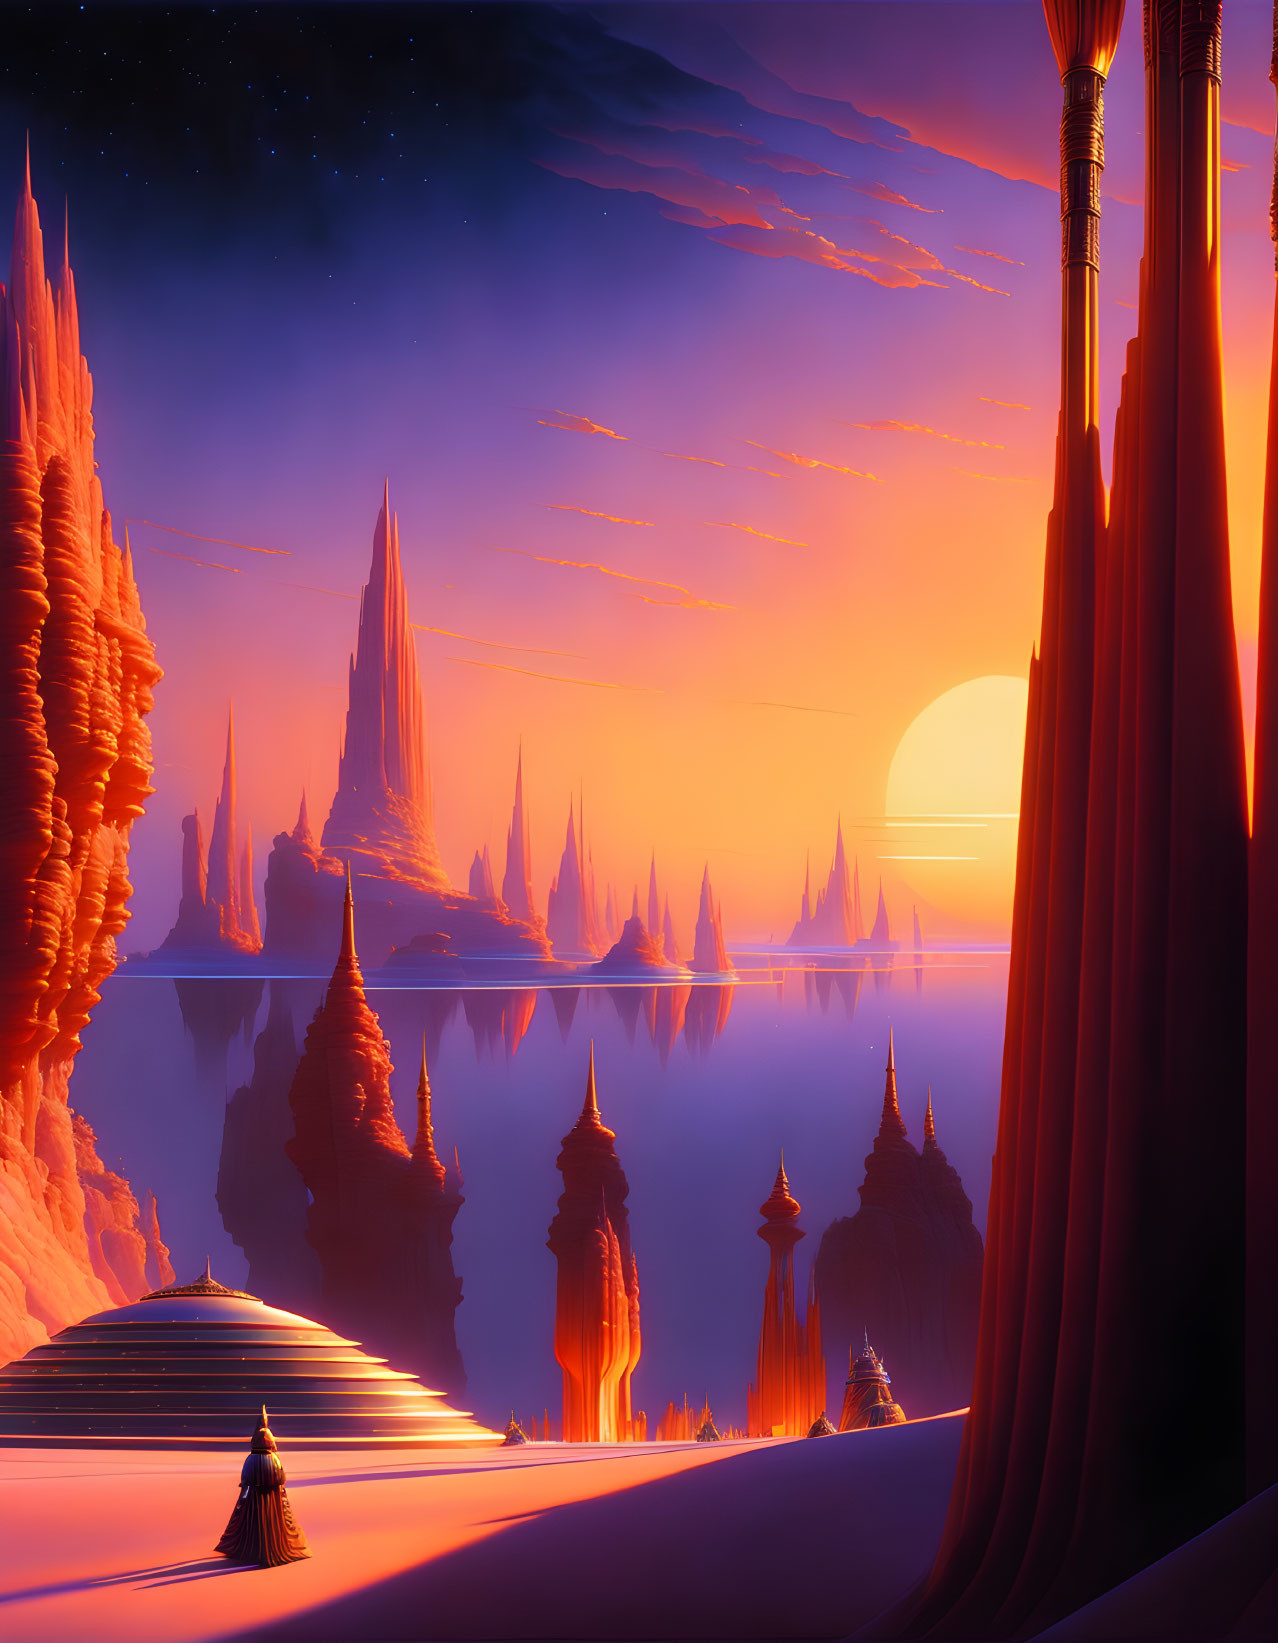 Surreal landscape with towering spires and large sun